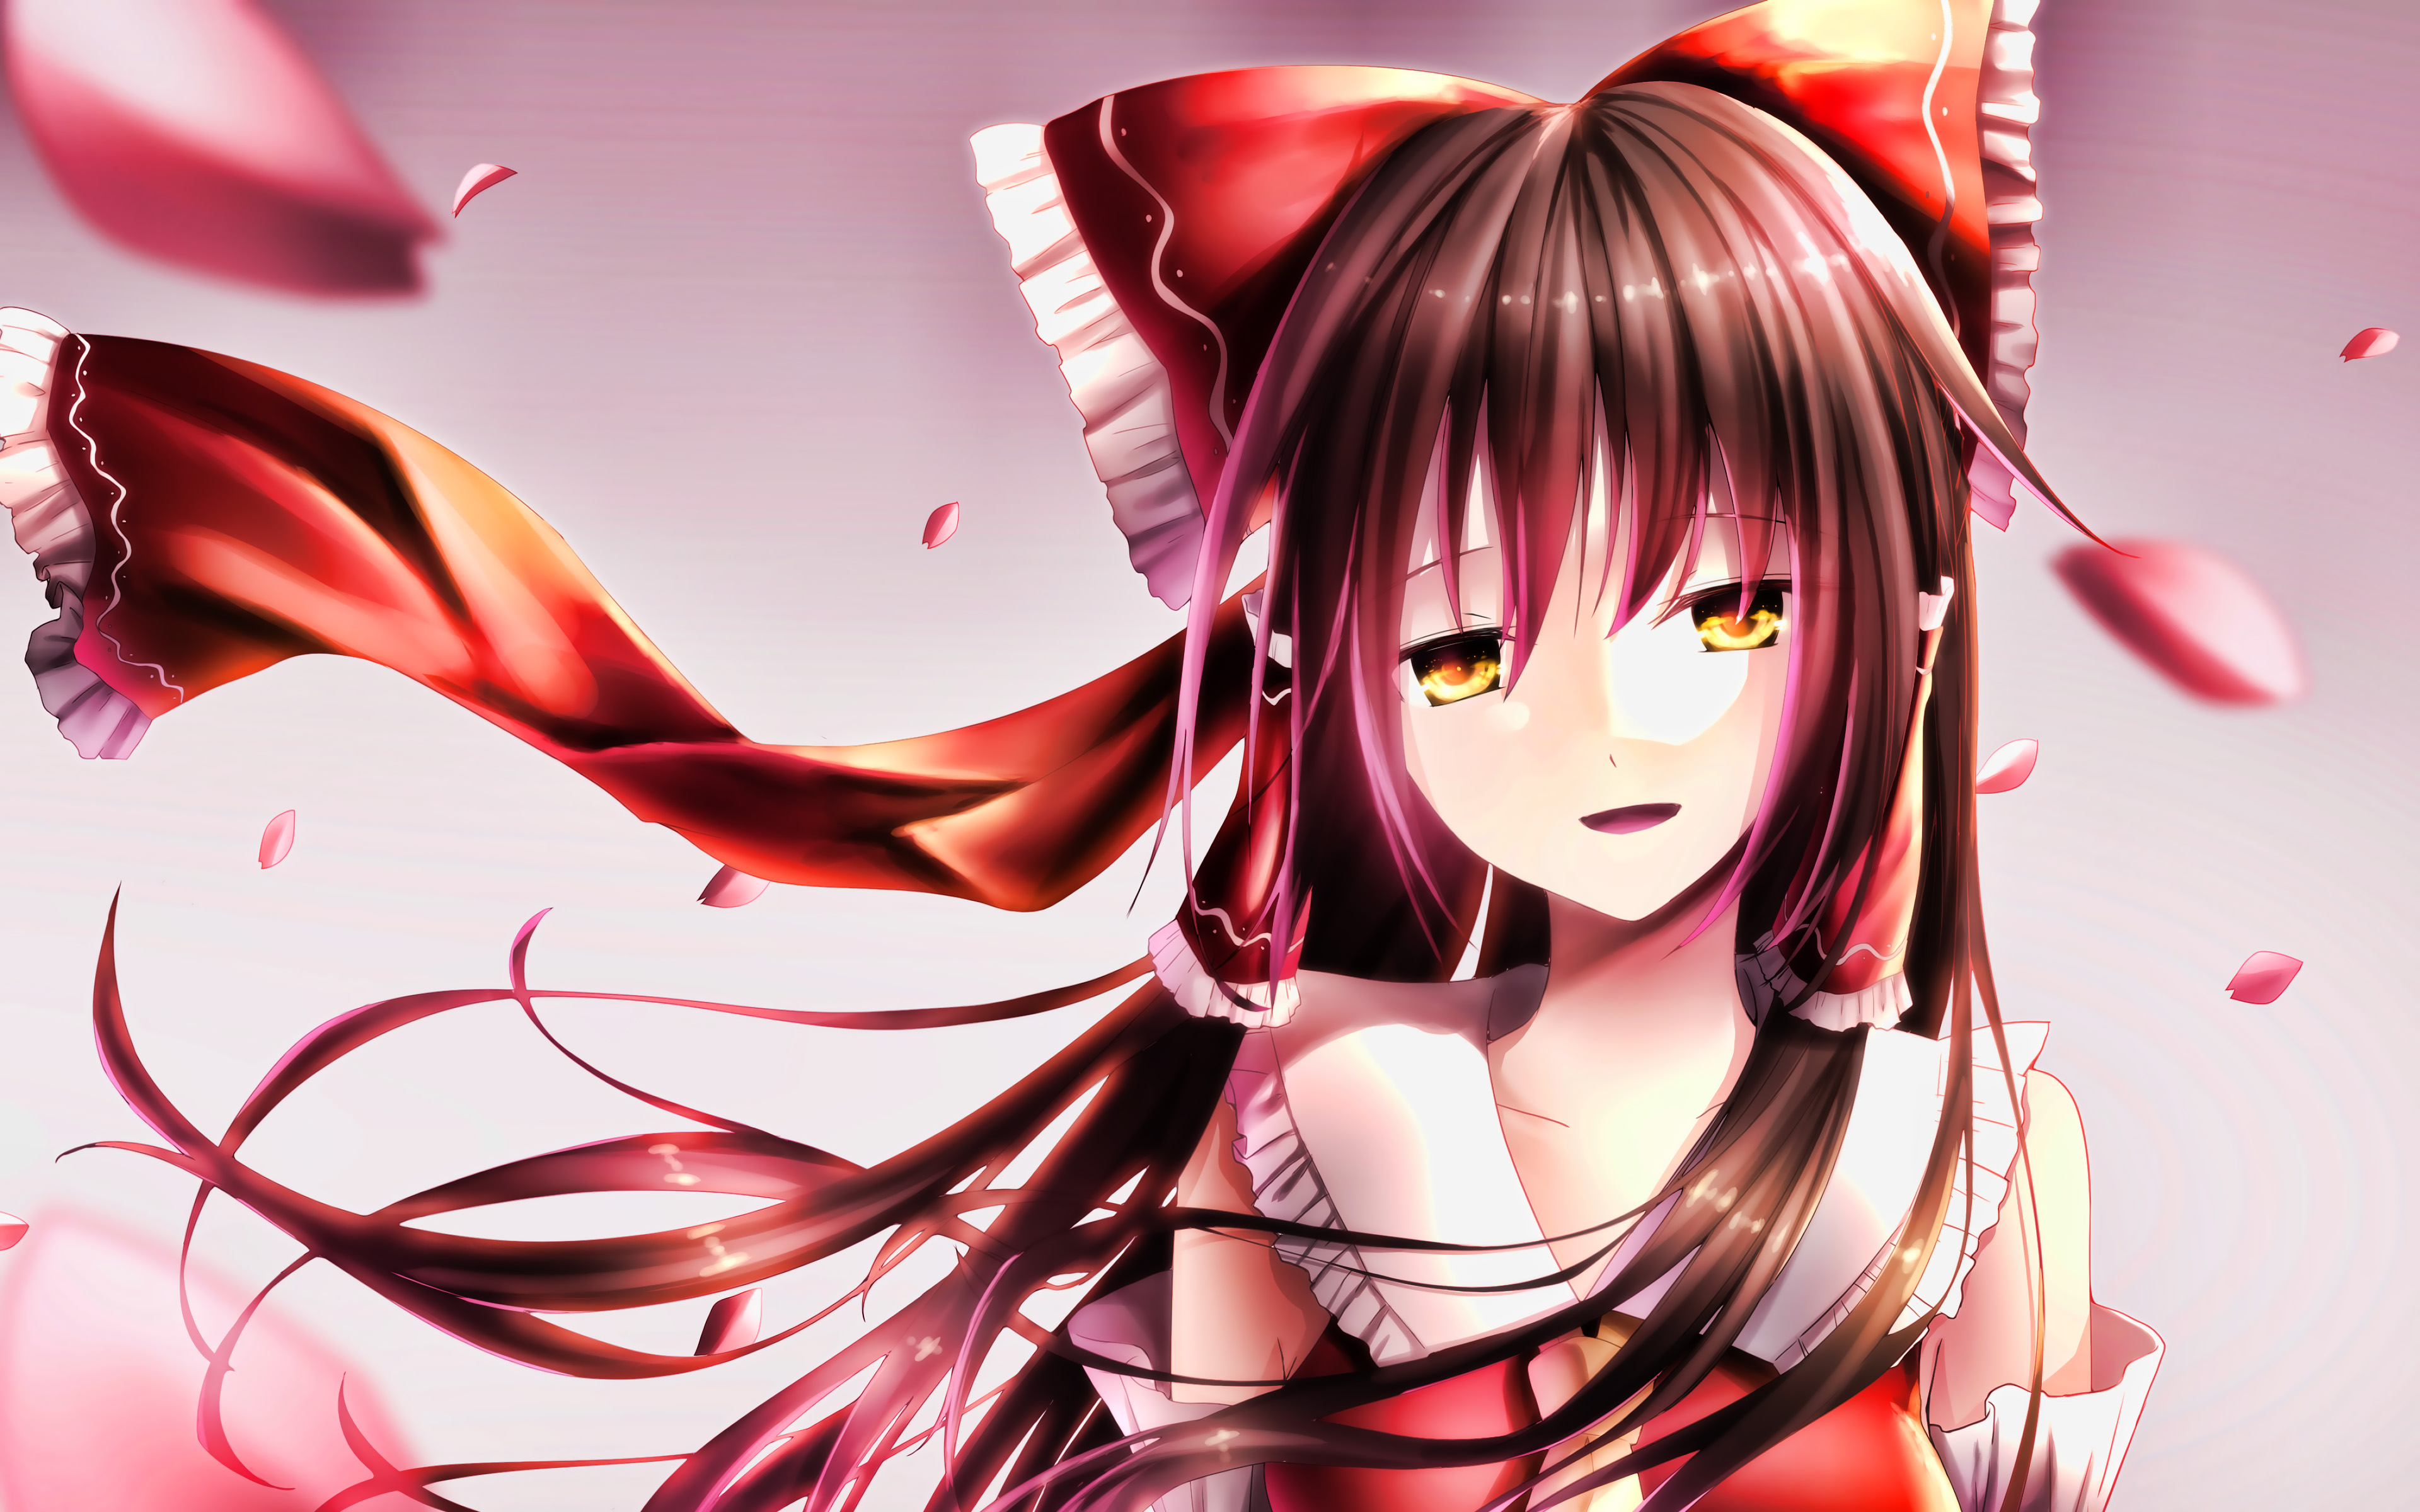 Download Wallpapers 4k Reimu Hakurei Portrait Touhou Manga Protagonist Touhou Project Artwork Touhou Characters Reimu Hakurei Touhou Hakurei Reimu For Desktop With Resolution 3840x2400 High Quality Hd Pictures Wallpapers